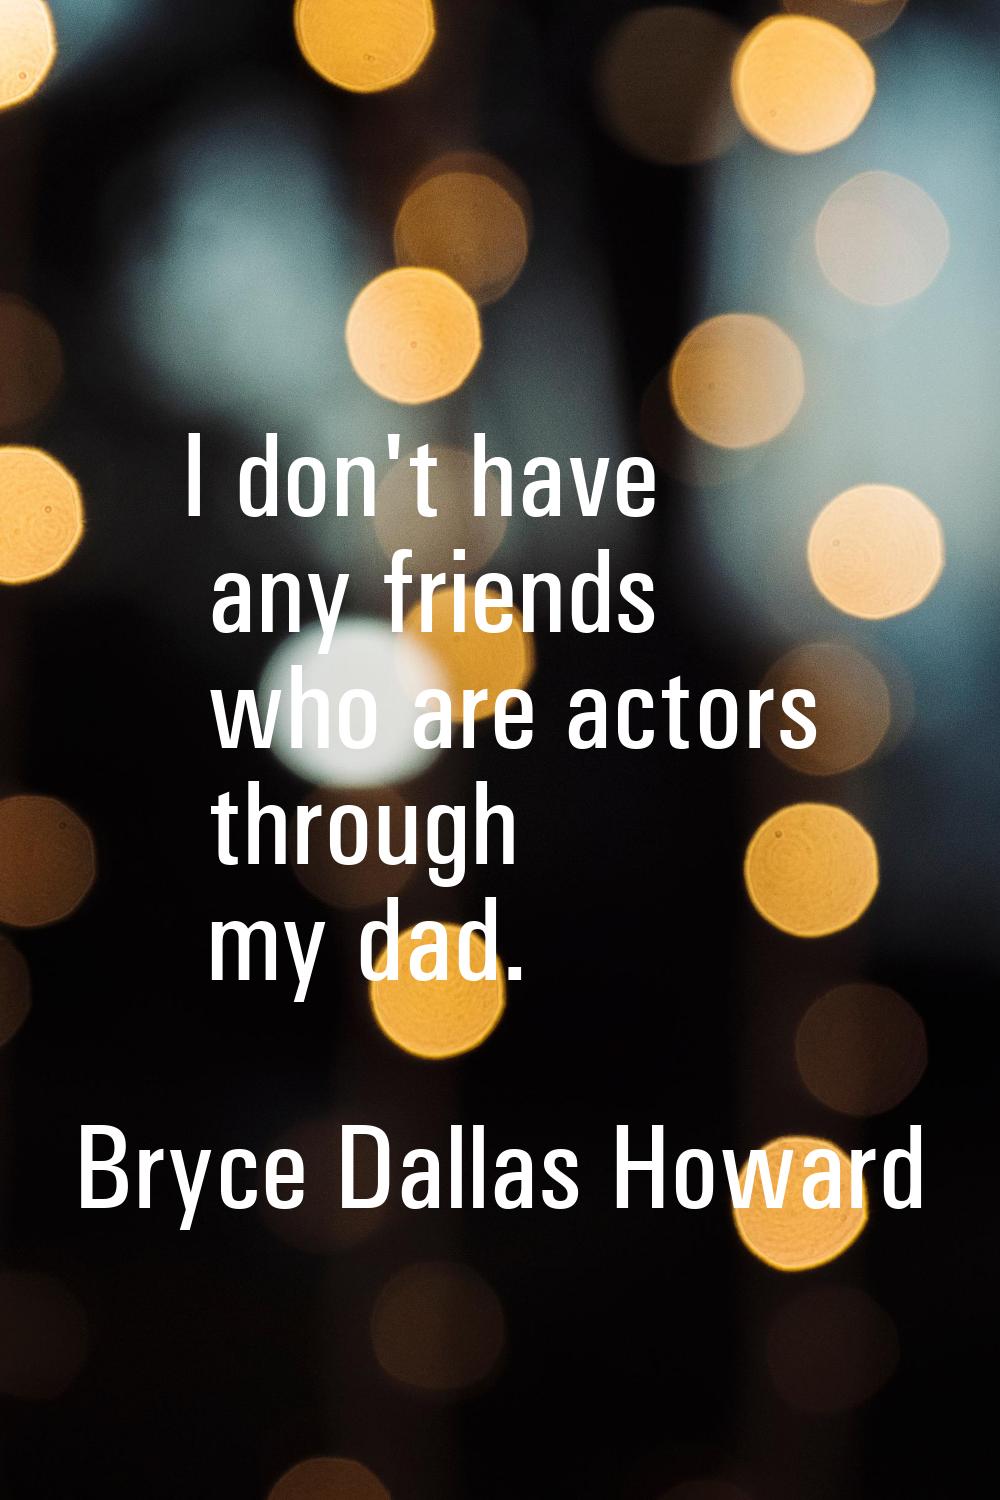 I don't have any friends who are actors through my dad.